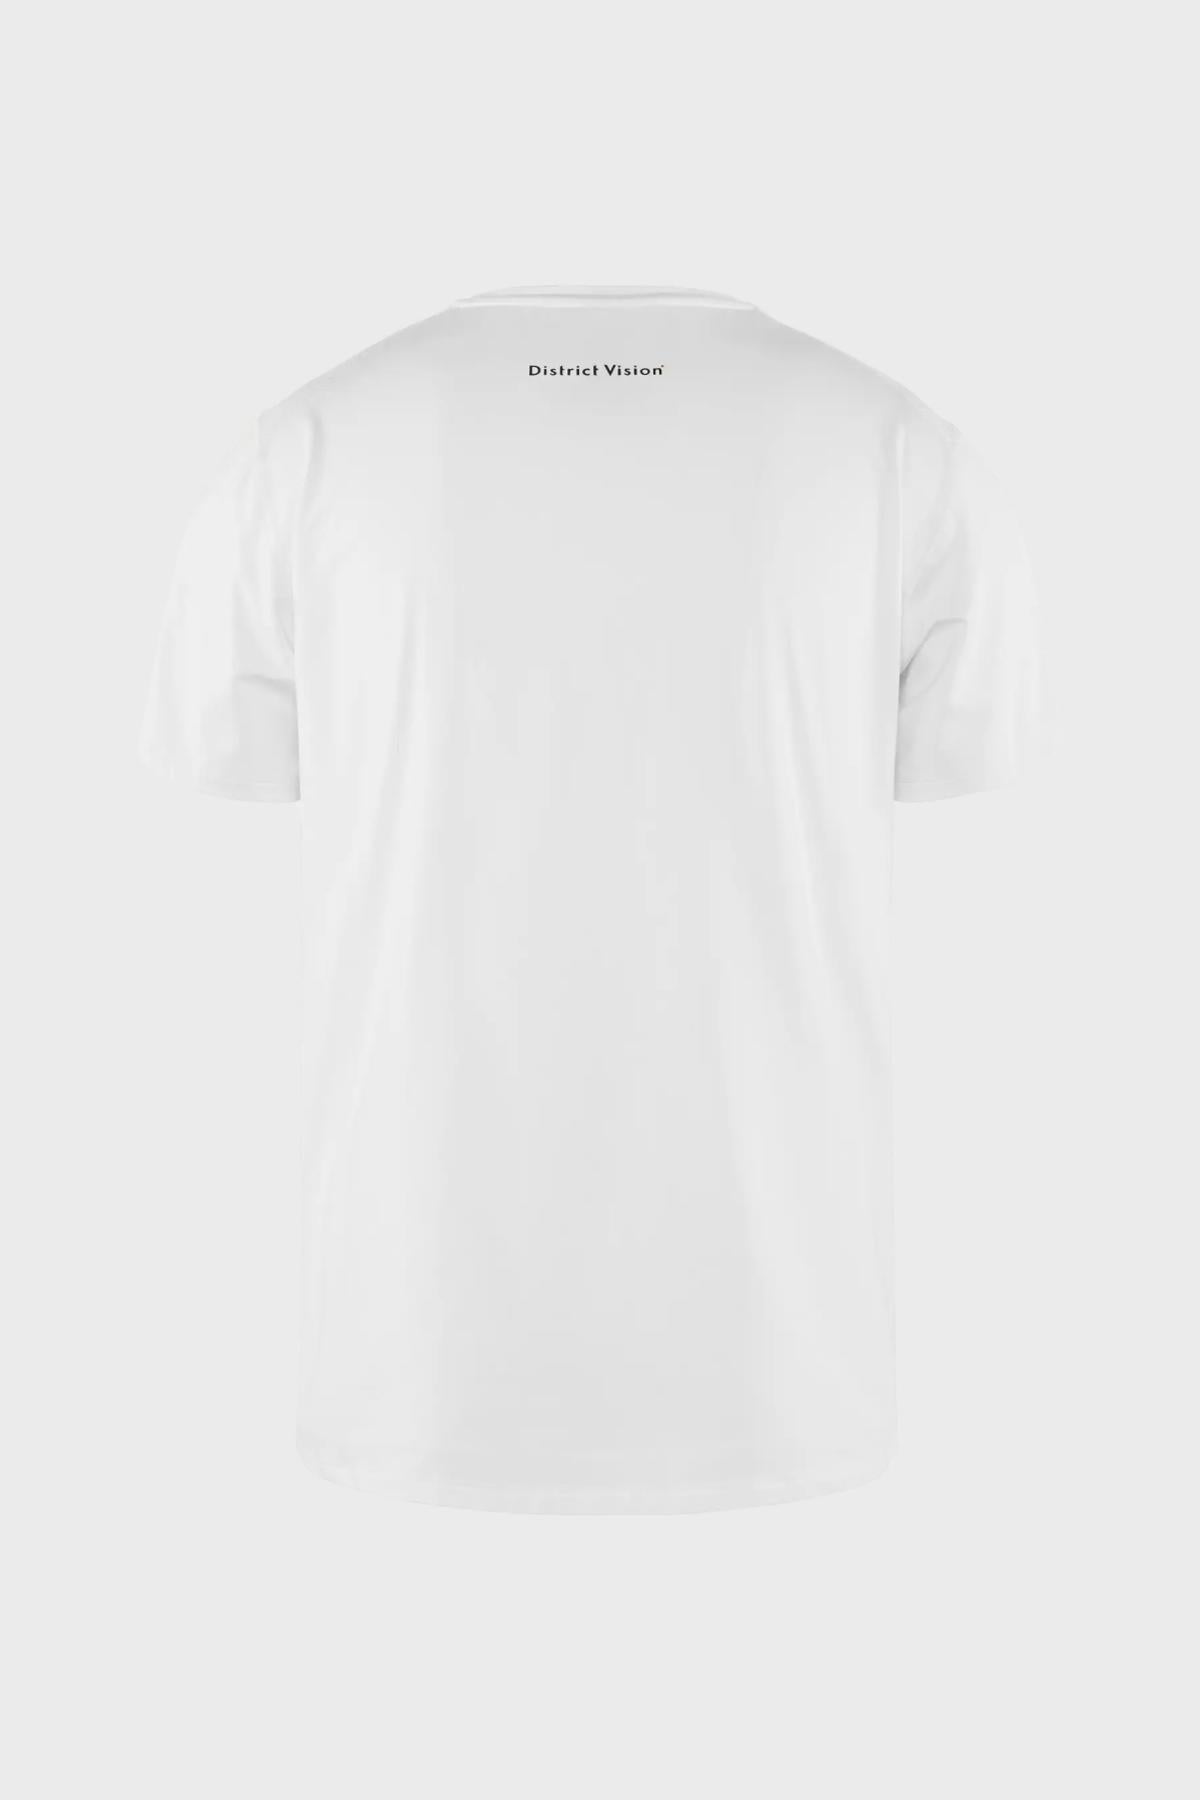 District Vision - Lightweight Shorts Sleeve Tee